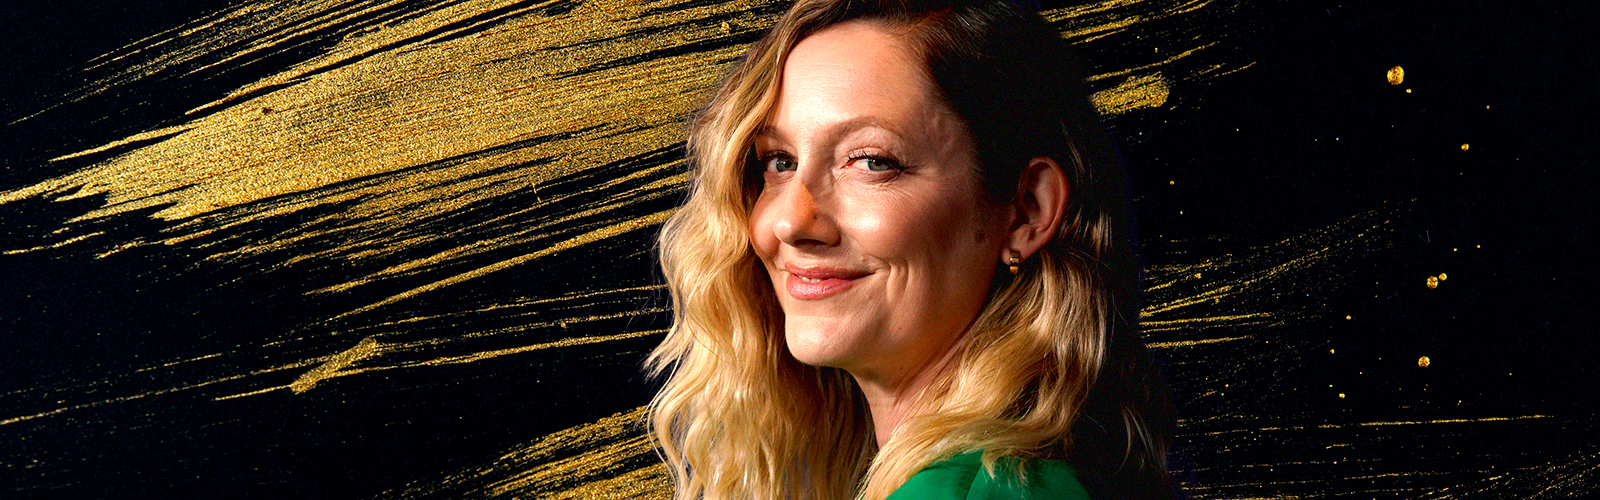 Judy Greer Finally Gets To Be The Star In ‘Reboot’